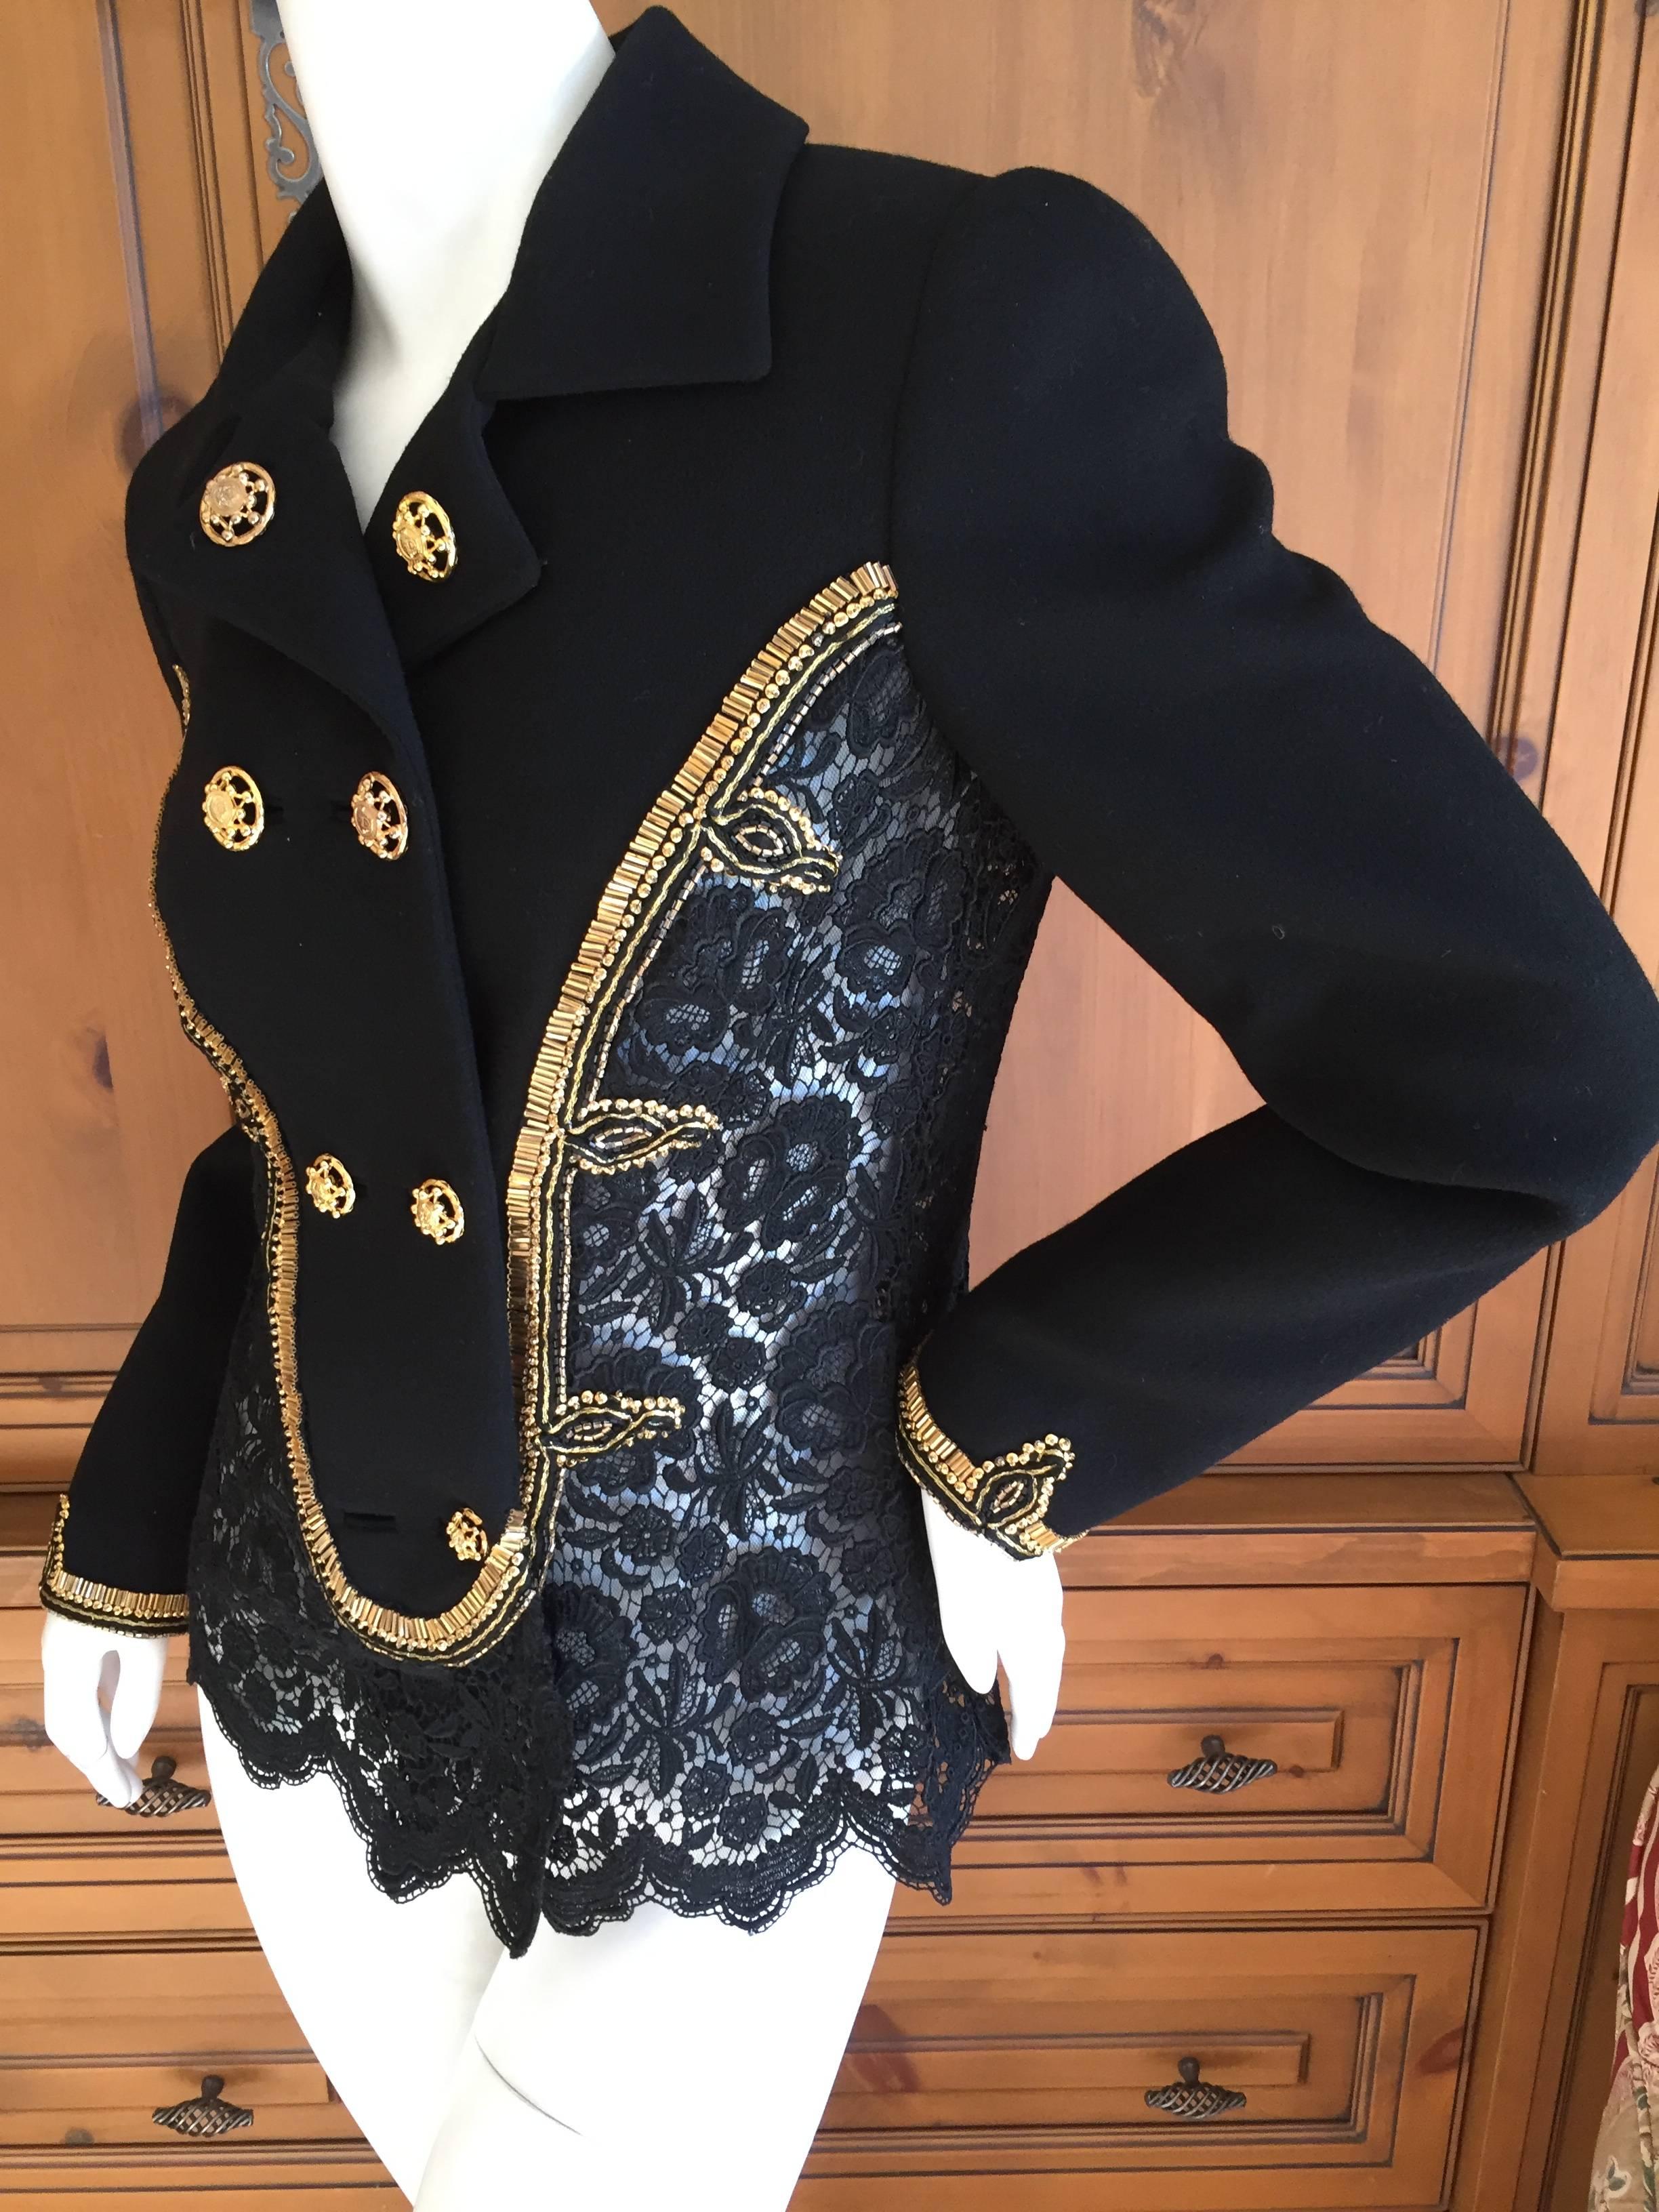 Gianni Versace Couture 1992 Beaded Black Lace Jacket For Sale 4